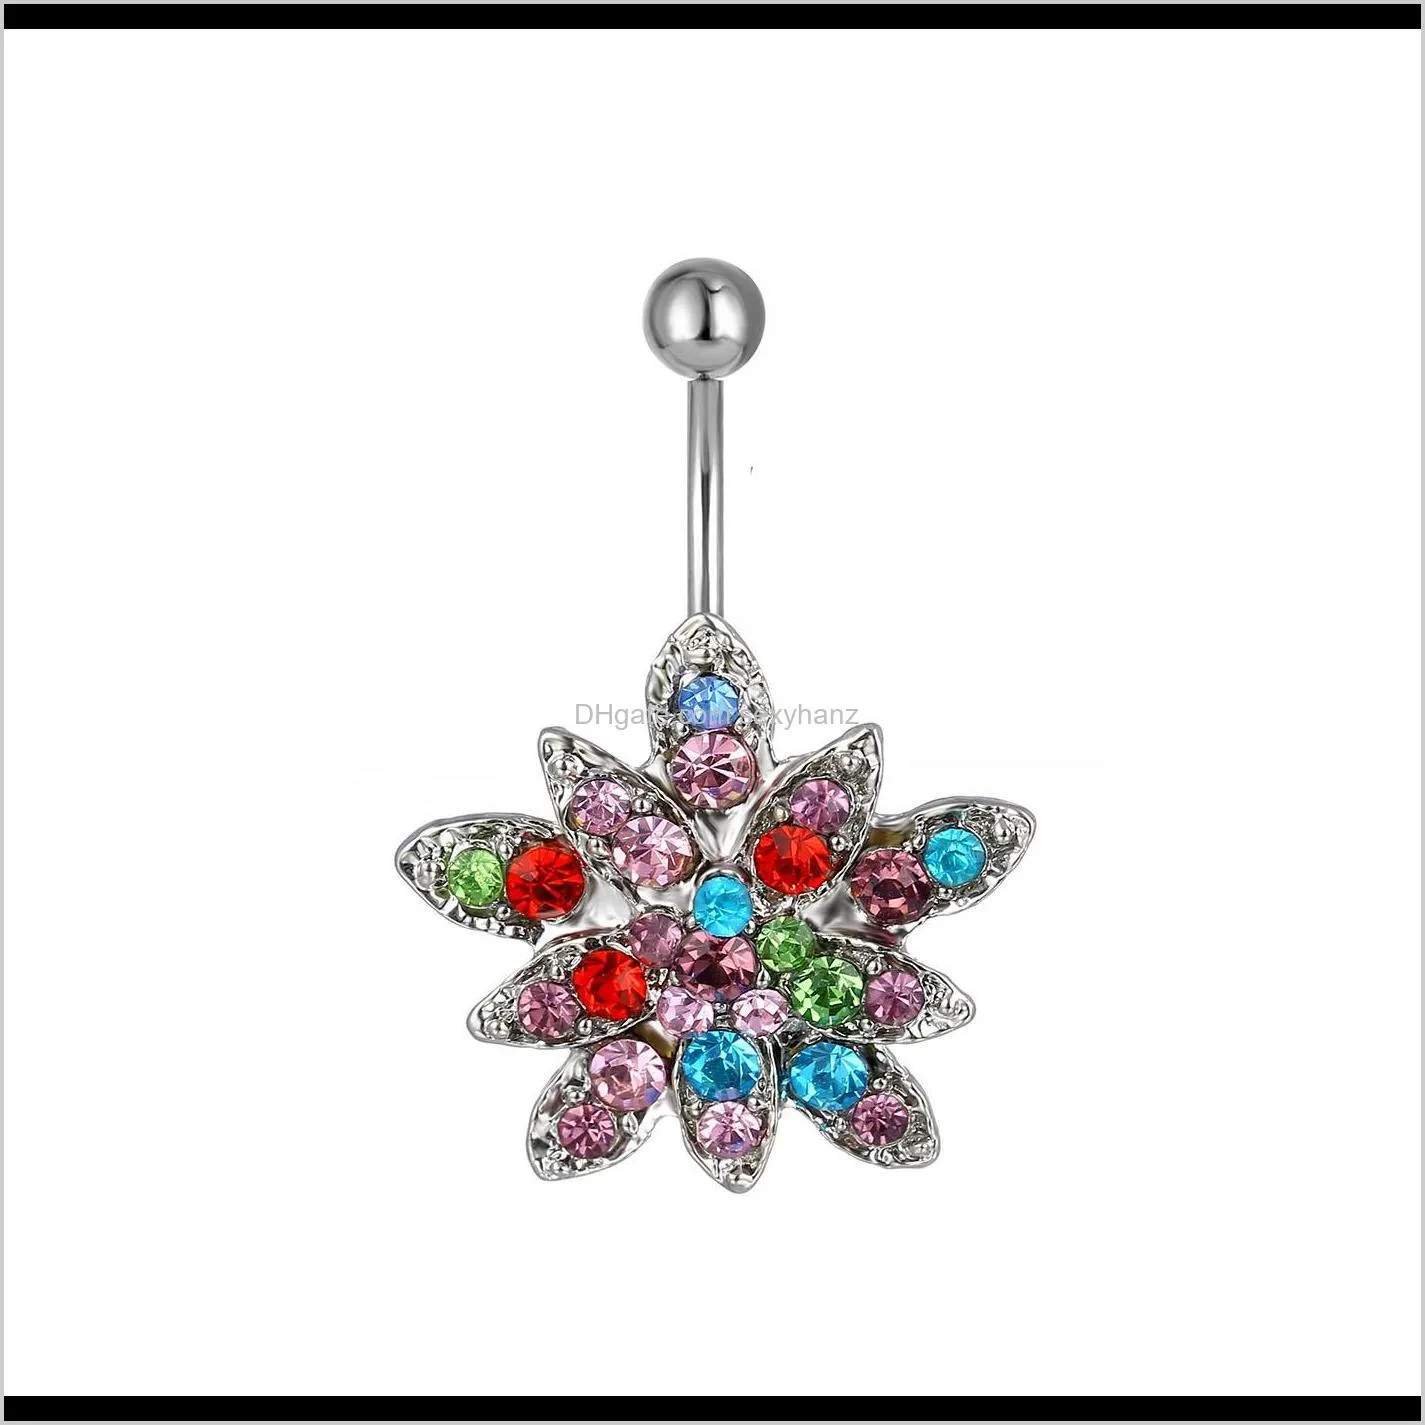 d0029 ( 1 color) the nice style 008-01 belly button navel rings mix colors piercing jewelry body jewelry navel ring